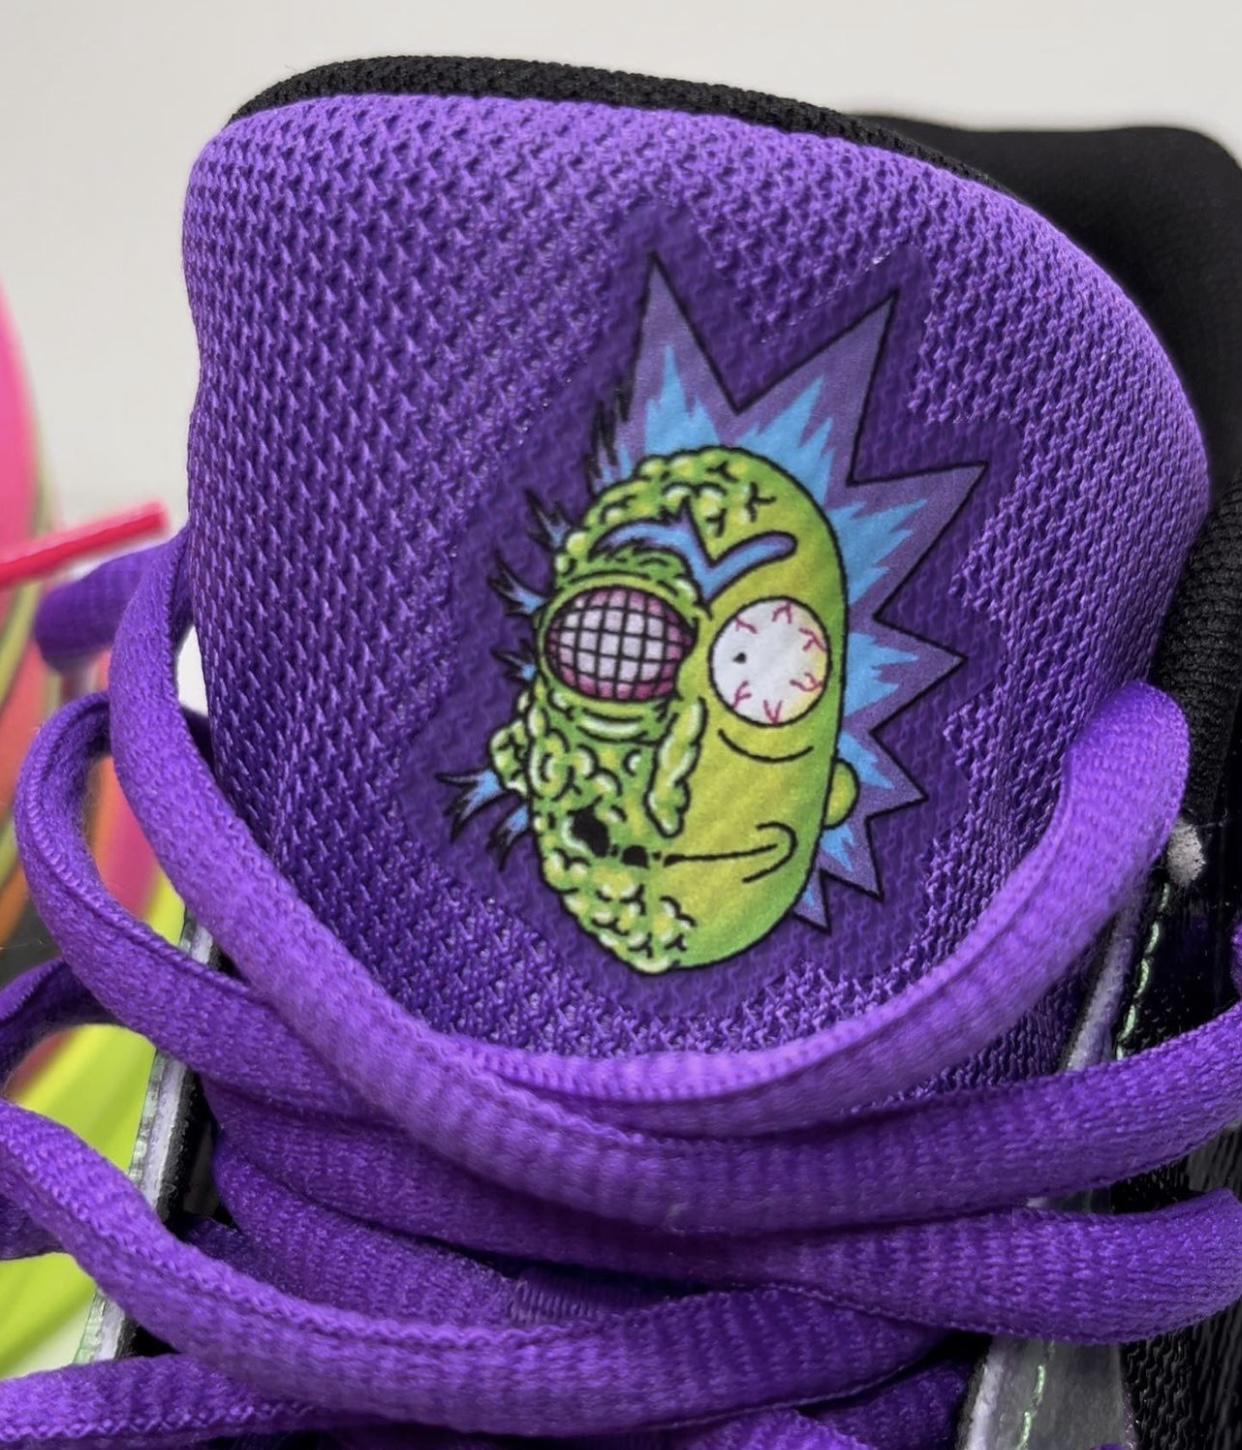 Rick and Morty Puma MB.02 377411-02 Release Date Info